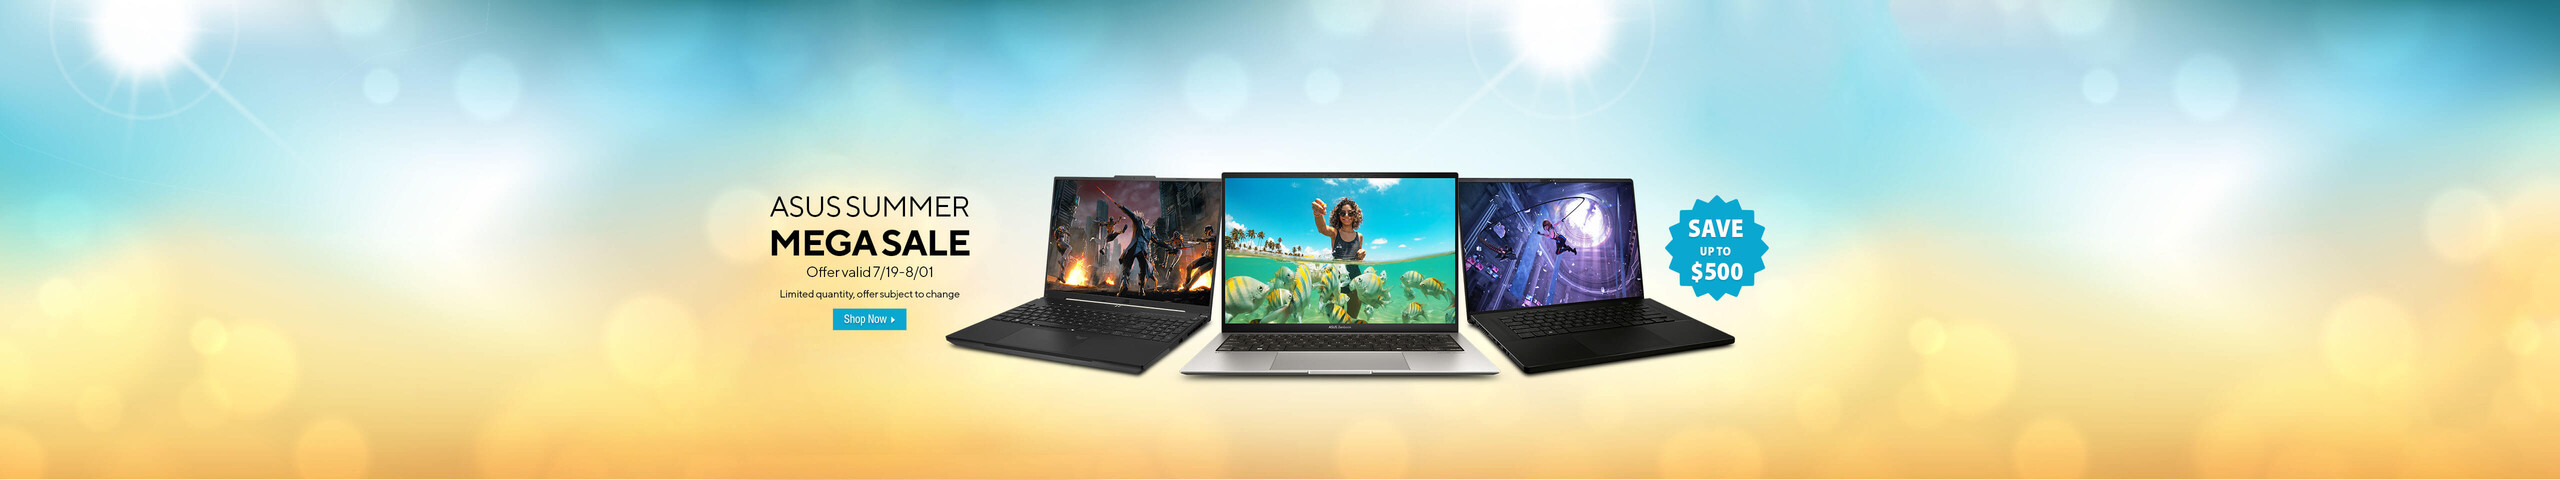 Image of 3 laptops.  ASUS Summer Mega Sale Offer Valid 7/19-8/1 Limited quantity, offer subject to change  Shop Now  Save Up To $500